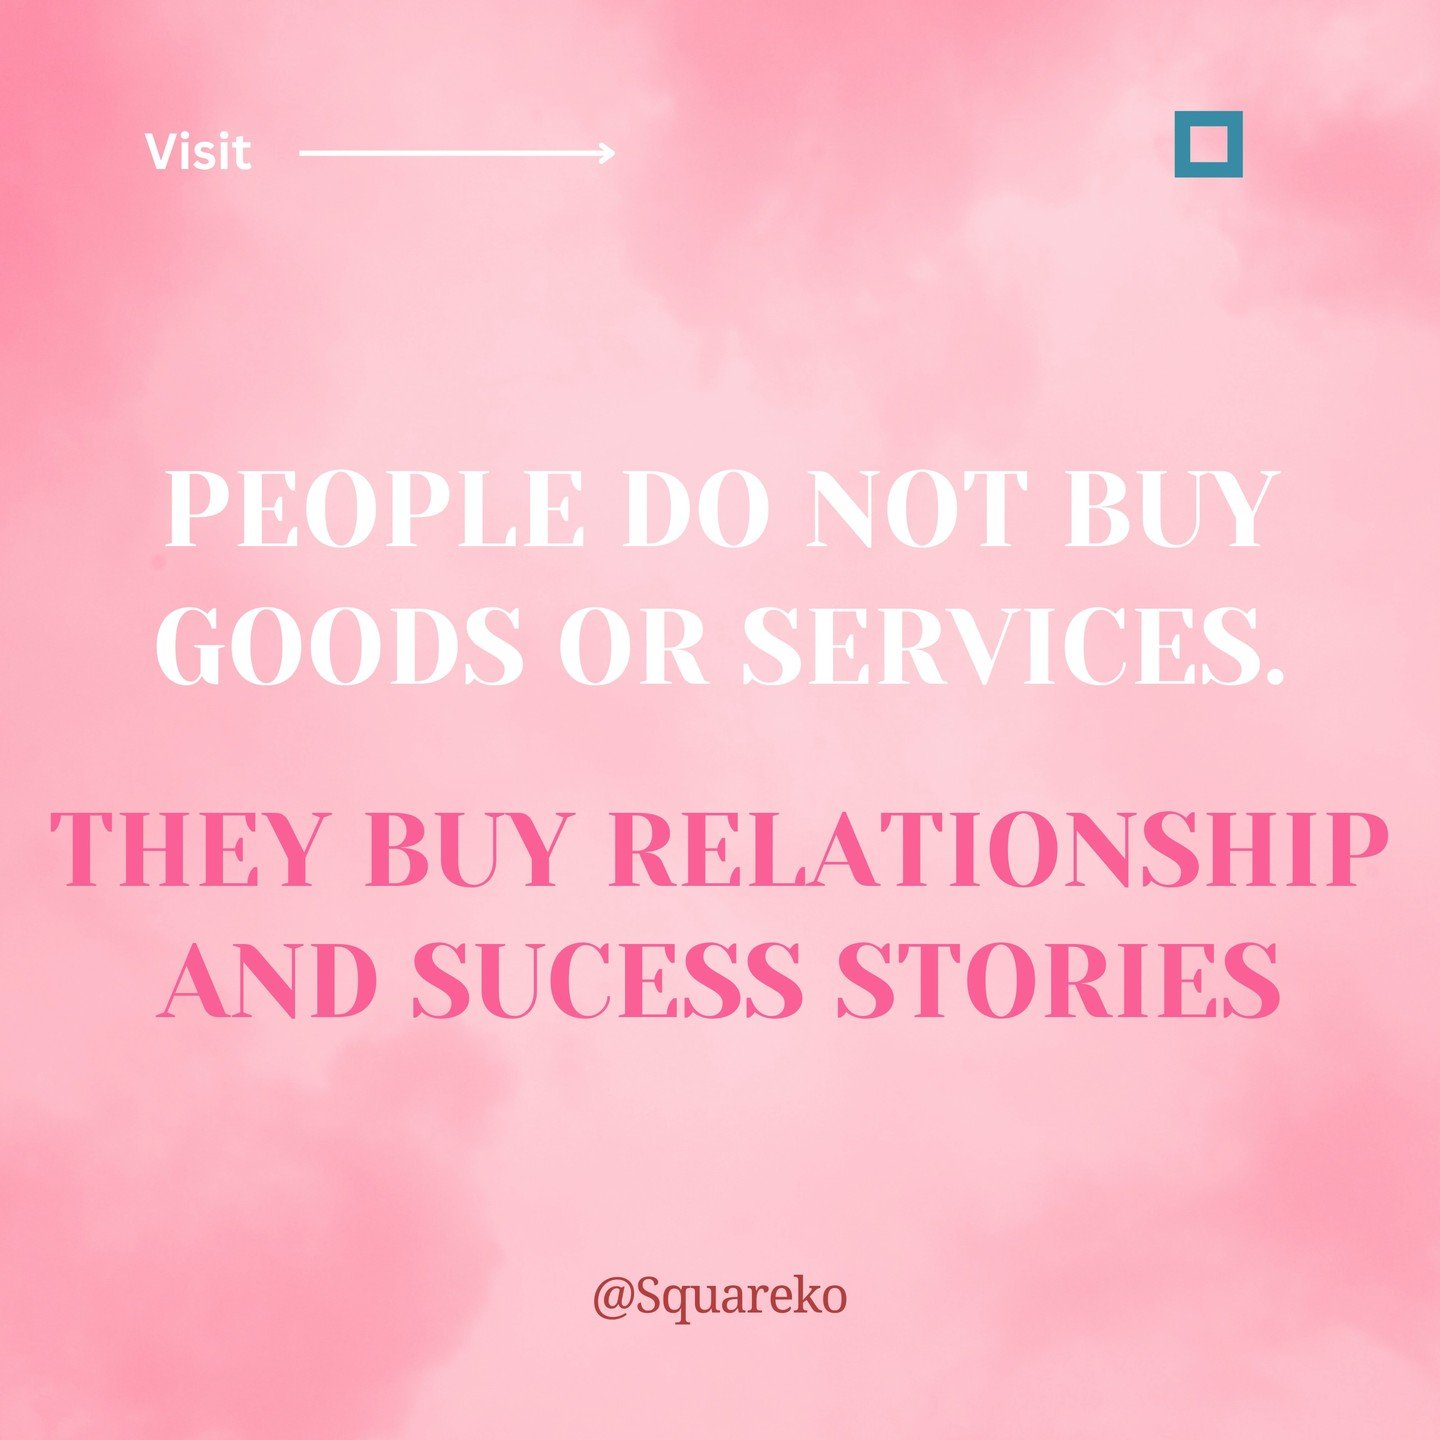 When you buy something, you're not just getting a product or service. You're investing in relationships and stories of success. Explore how every purchase builds connections and leads to achievements. Join us in celebrating the importance of these me